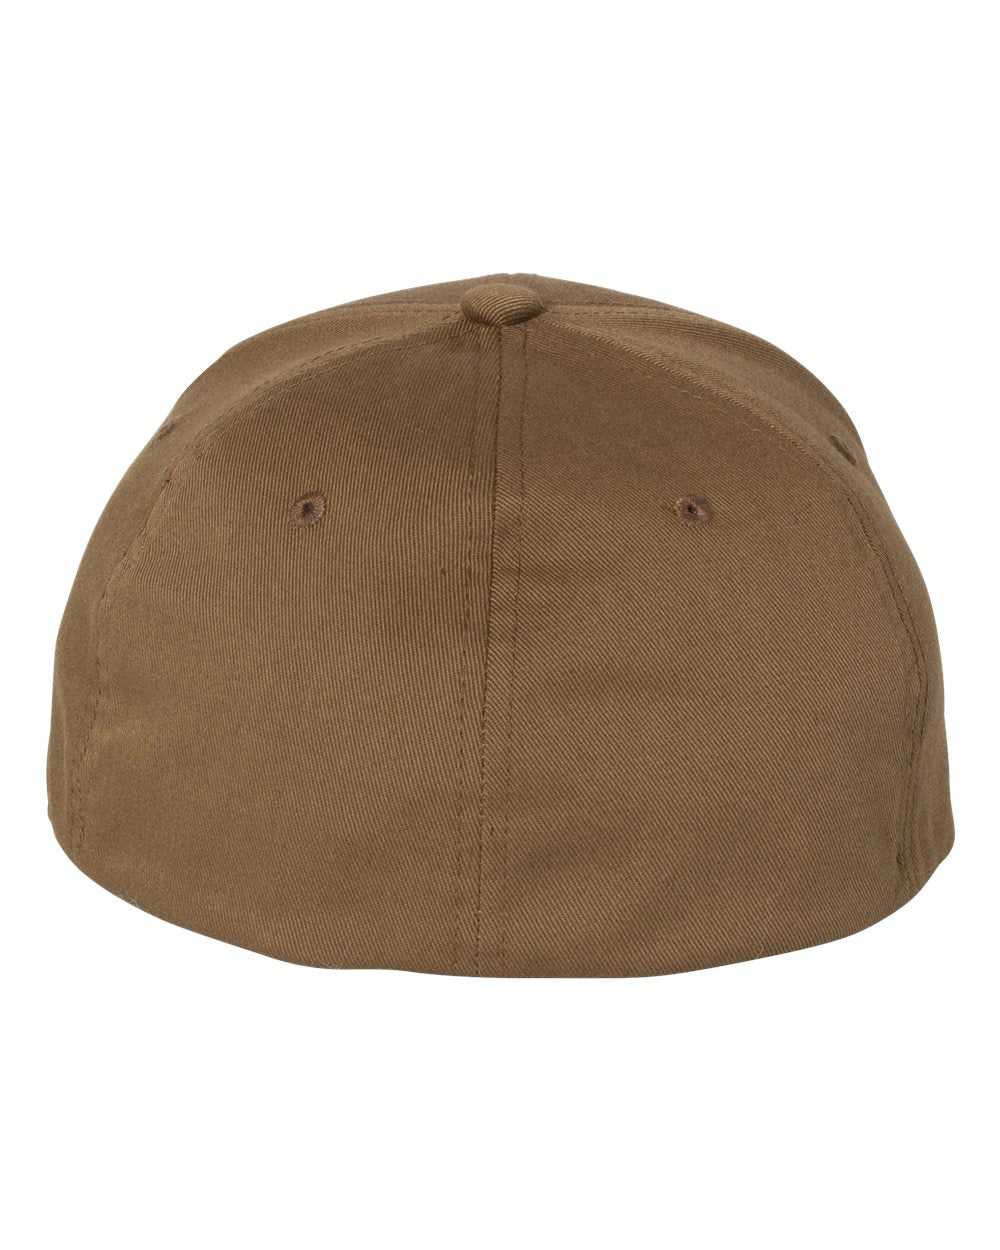 Flexfit 6277 Twill Cap - Coyote Brown - HIT a Double